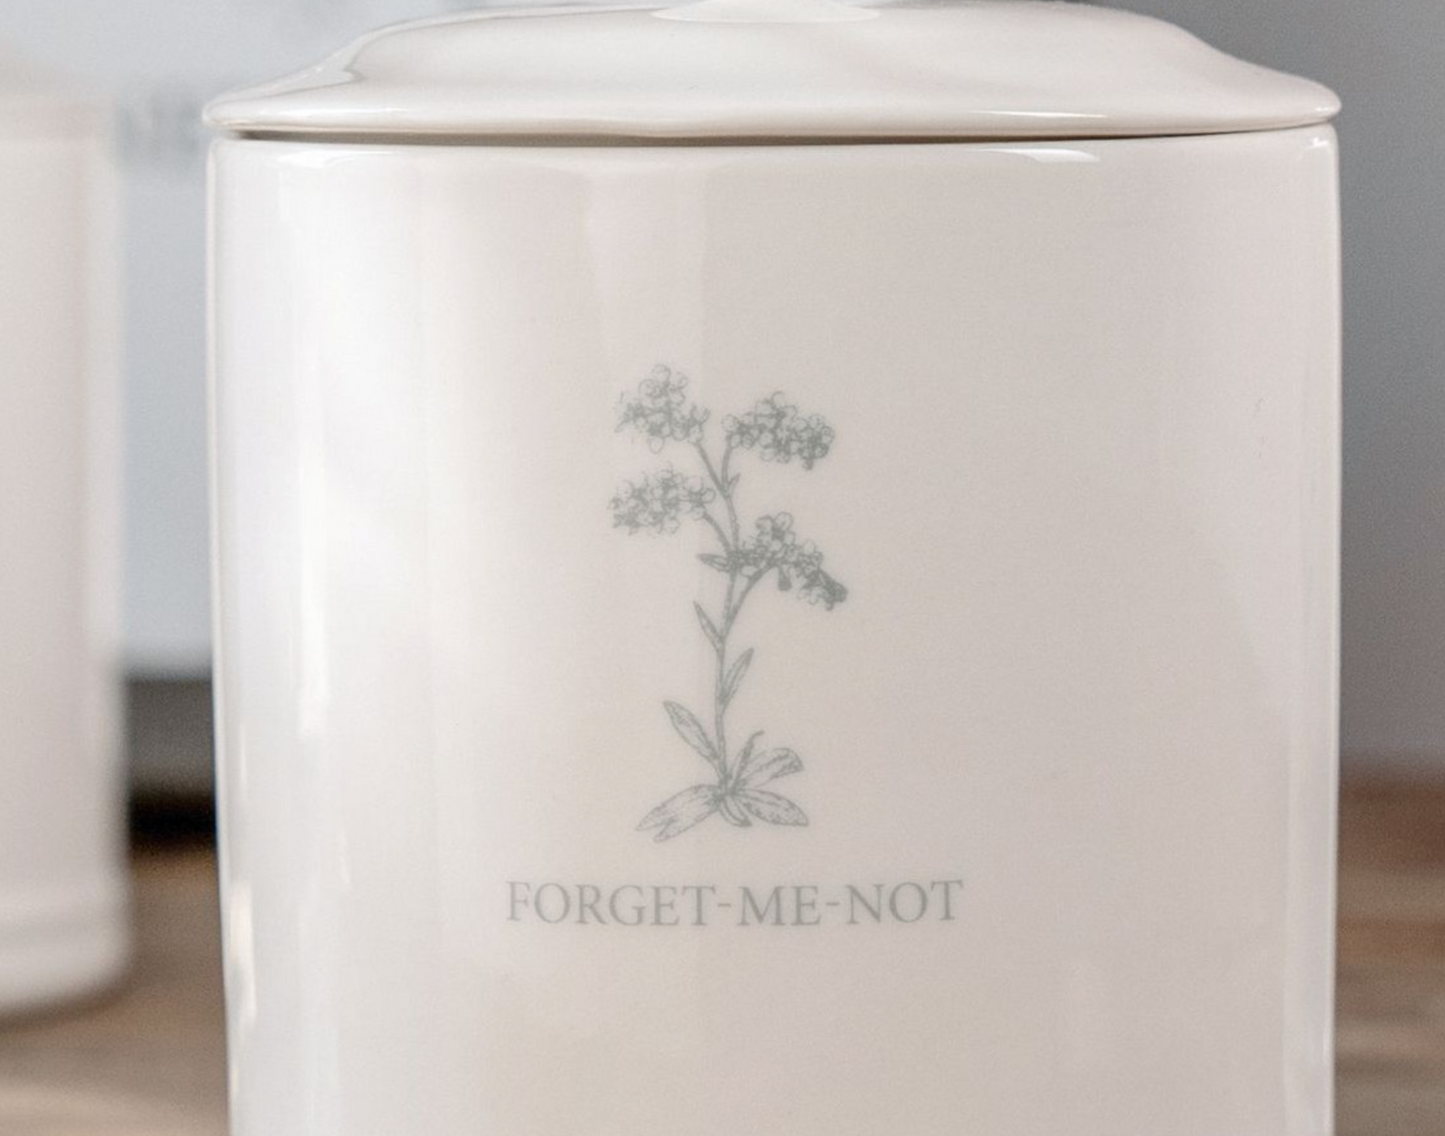 Mary Berry English Garden Collection Coffee Canister, Forget Me Not